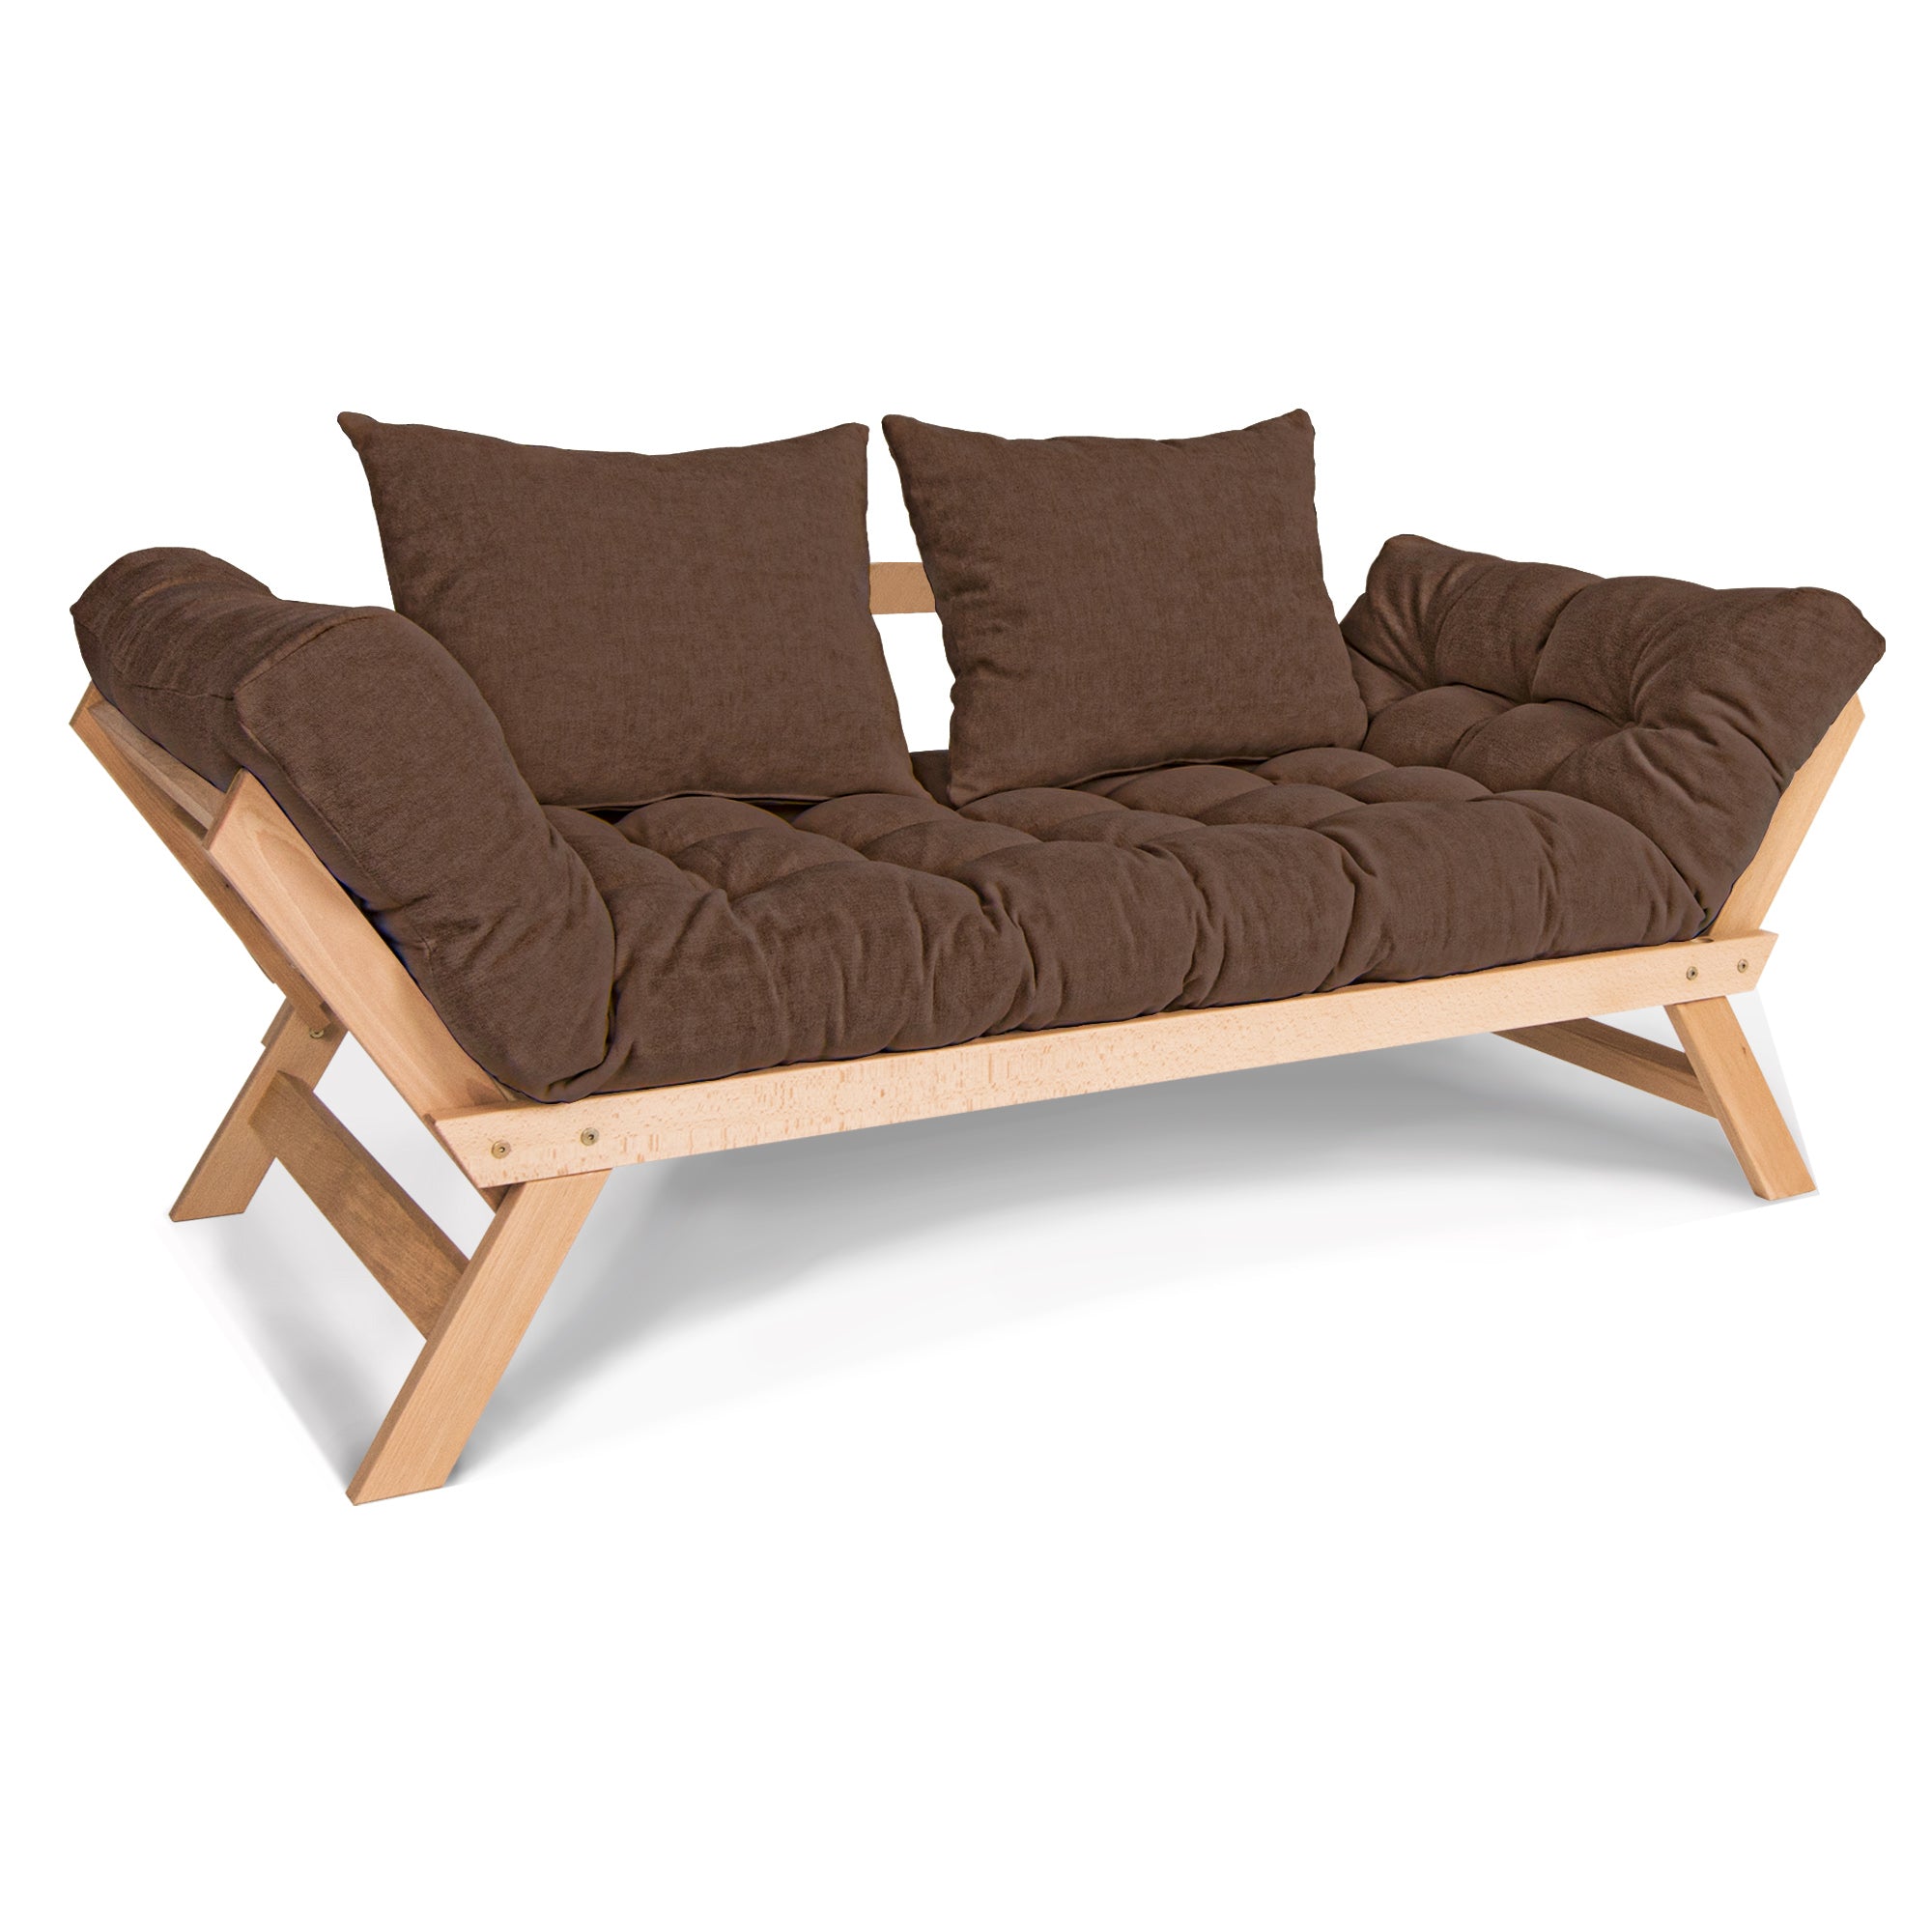 ALLEGRO Folding Sofa Bed, Beech Wood Frame, Natural Colour upholstery colour  brown